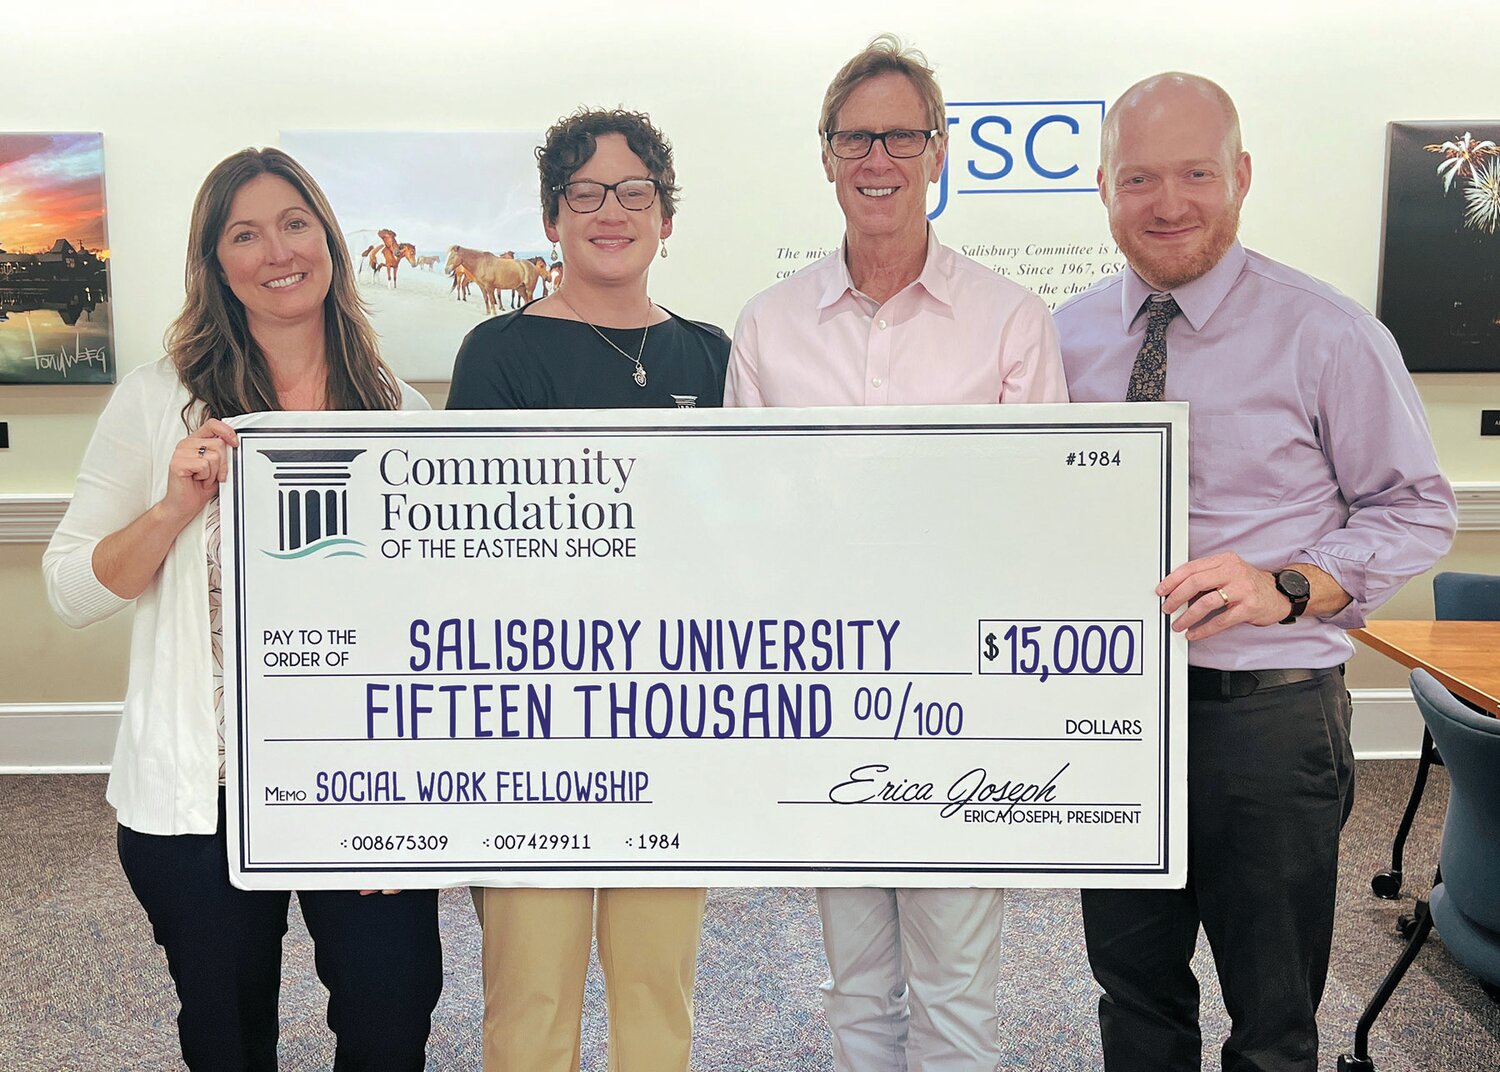 From left to right: Dr. Samantha Scott, Healthy Minds for Shore Co-Founder; Erica Joseph, Community Foundation of the Eastern Shore President; Mike Dunn, Greater Salisbury Committee President & CEO; Dr. Stephen Oby, MSW Program Director, Salisbury University.